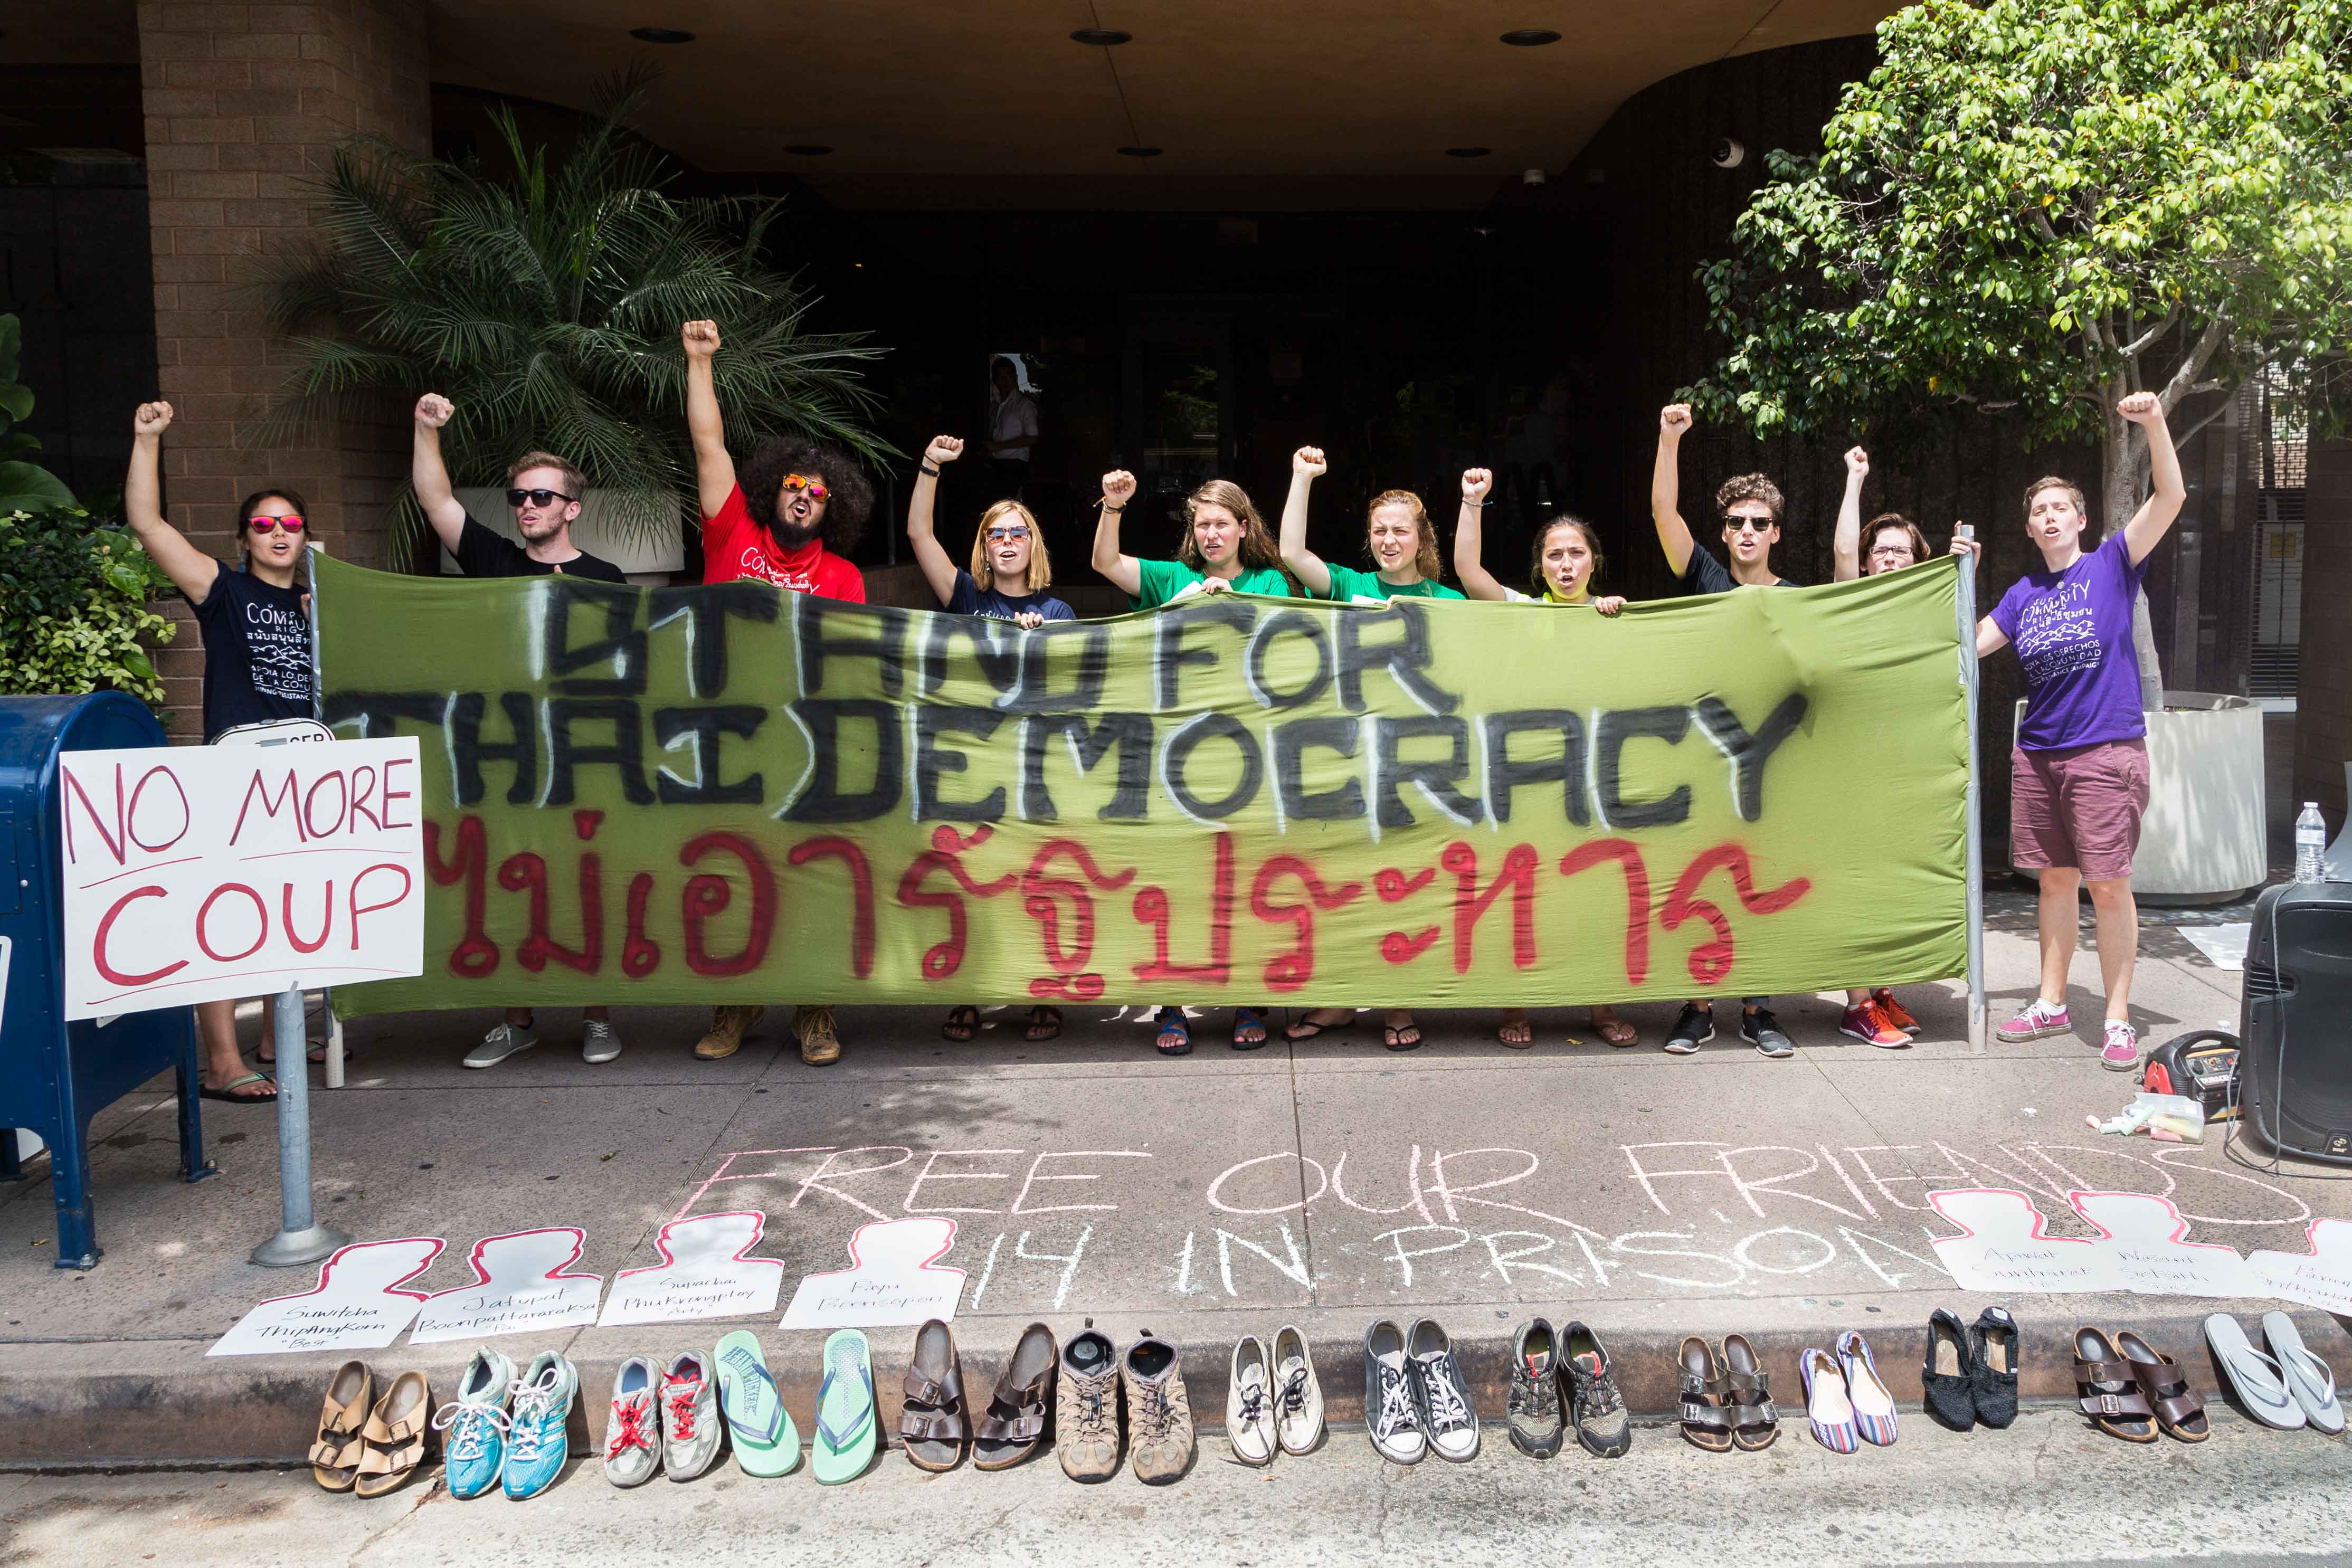 Fourteen pairs of shoes symbolize each student arrested in Bangkok for peaceful protesting. Photo credit: Jeremy Starn